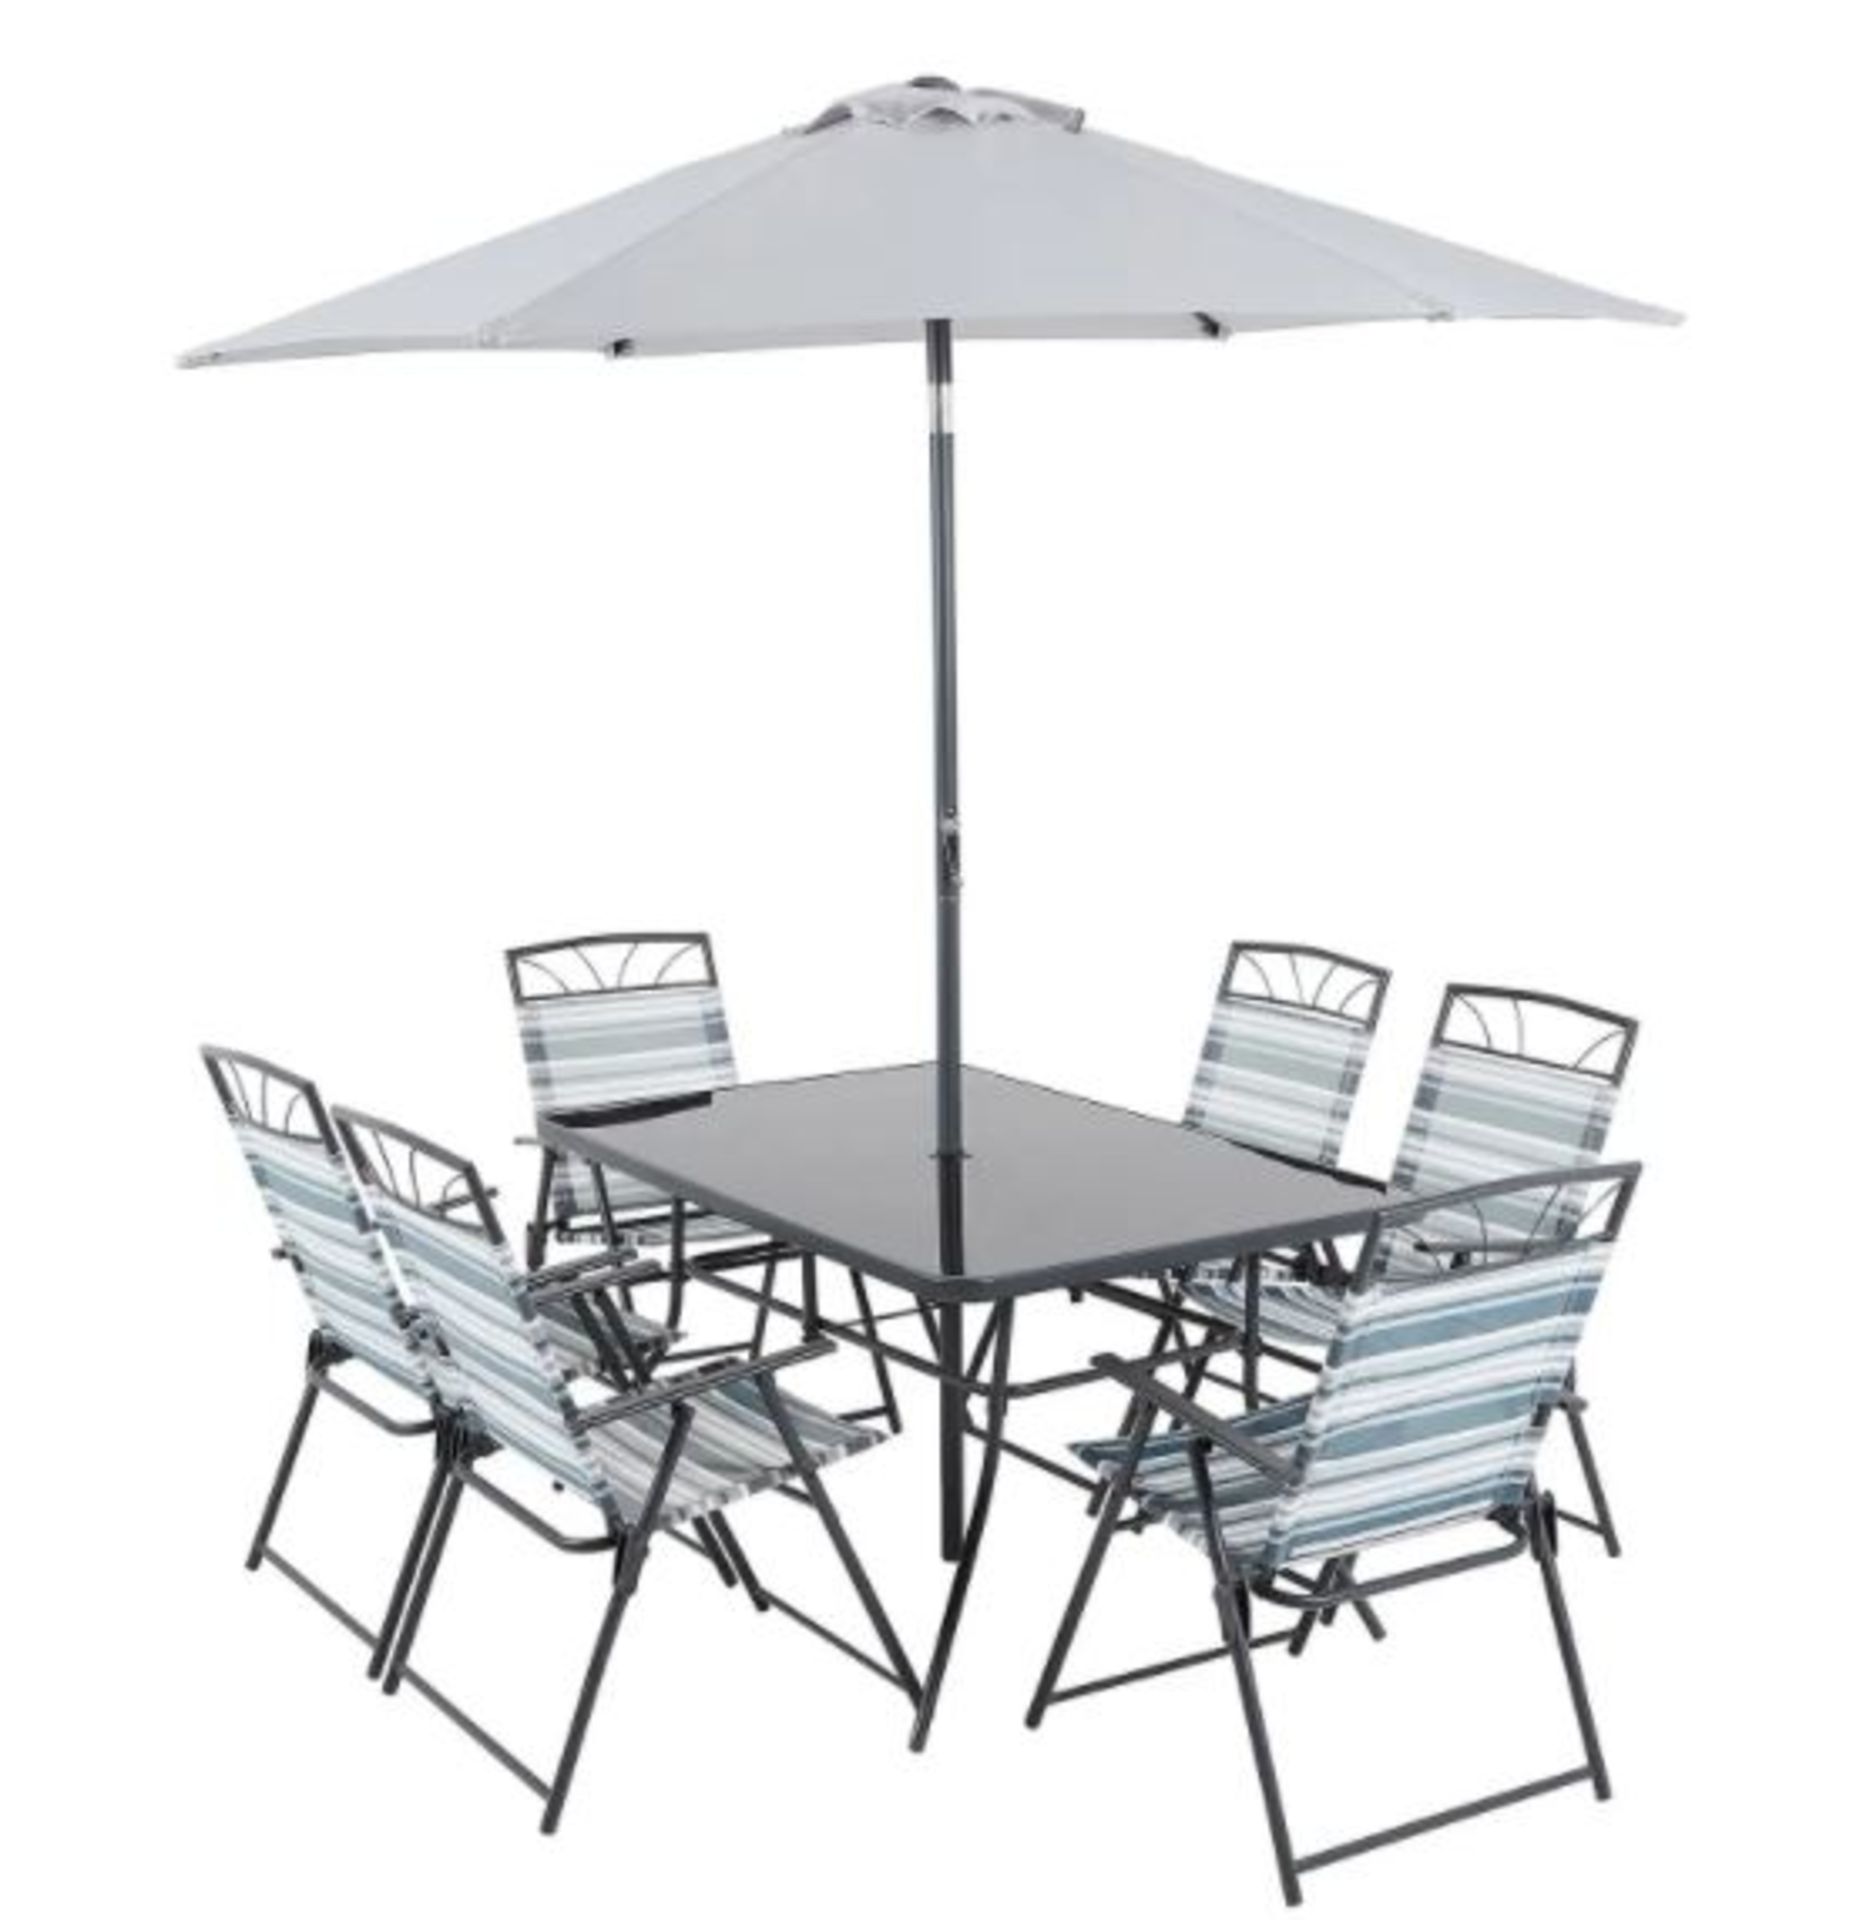 (R16) 1x Wexfordly 6 Seater Folding Dining Set RRP £200. Foldable Chairs For Easy Storage. Tempere